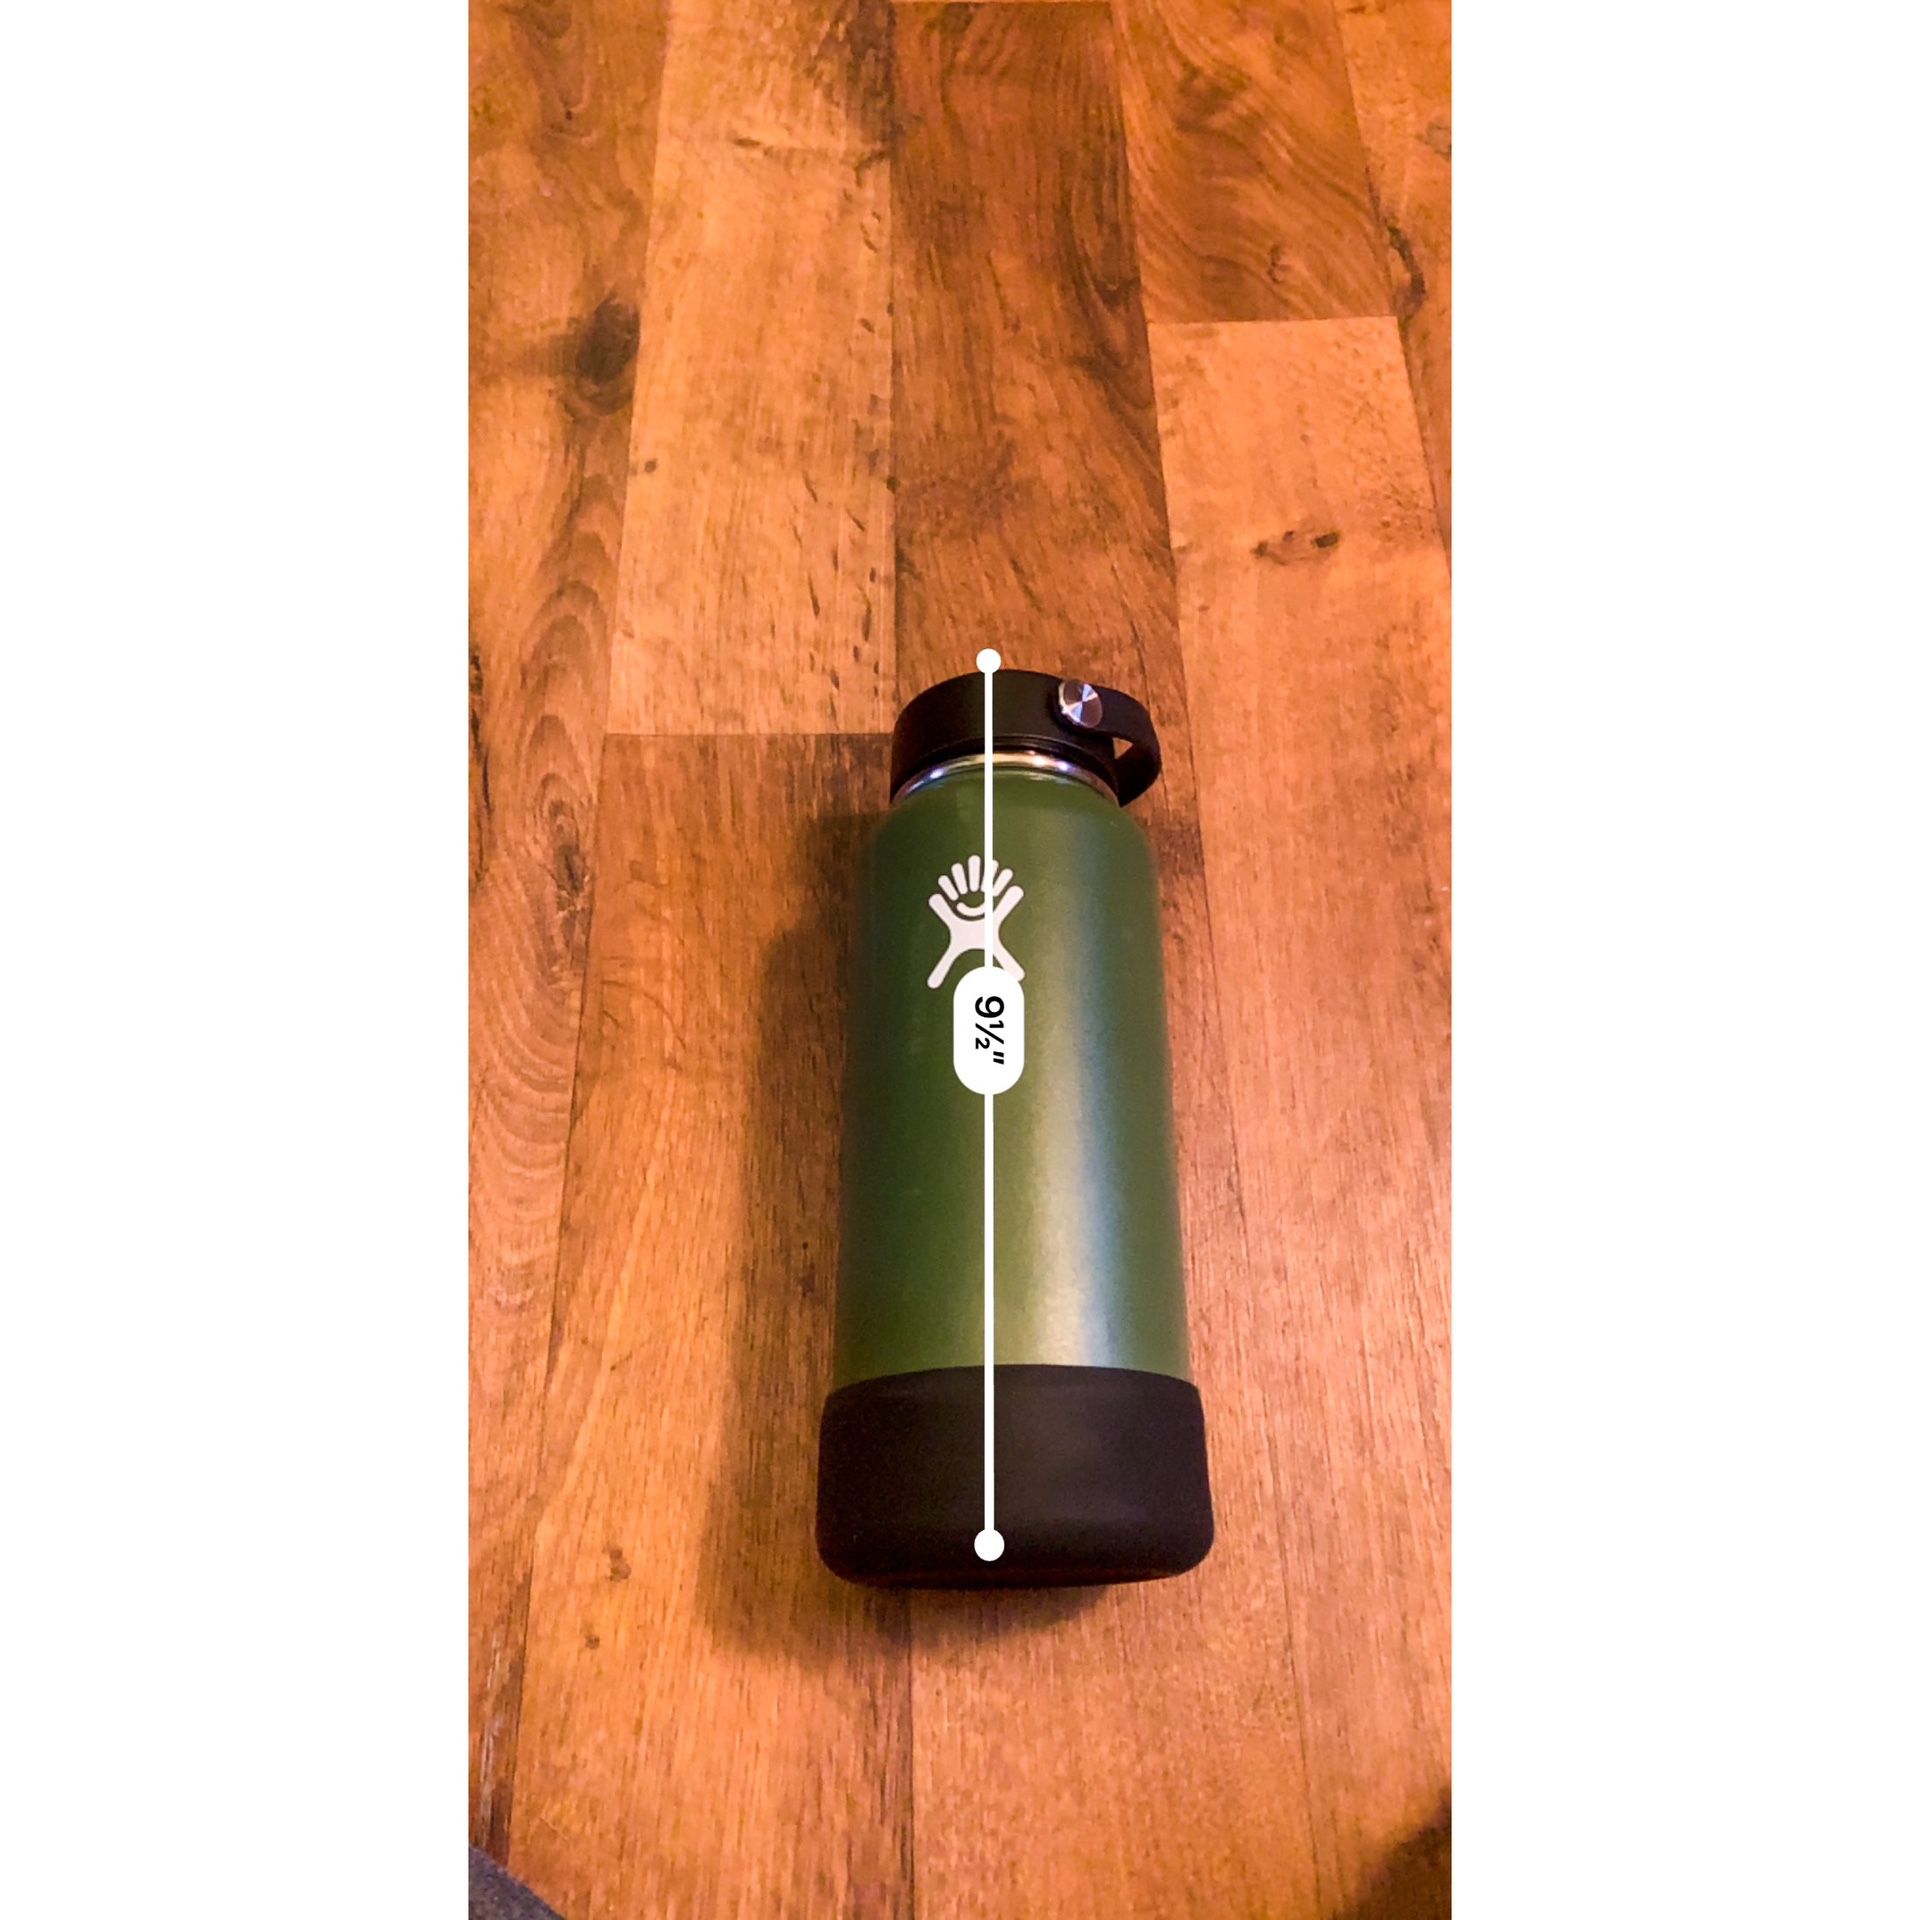 Hydro Flask Wide Mouth 32 oz. Olive Green for Sale in Limestone, TN -  OfferUp